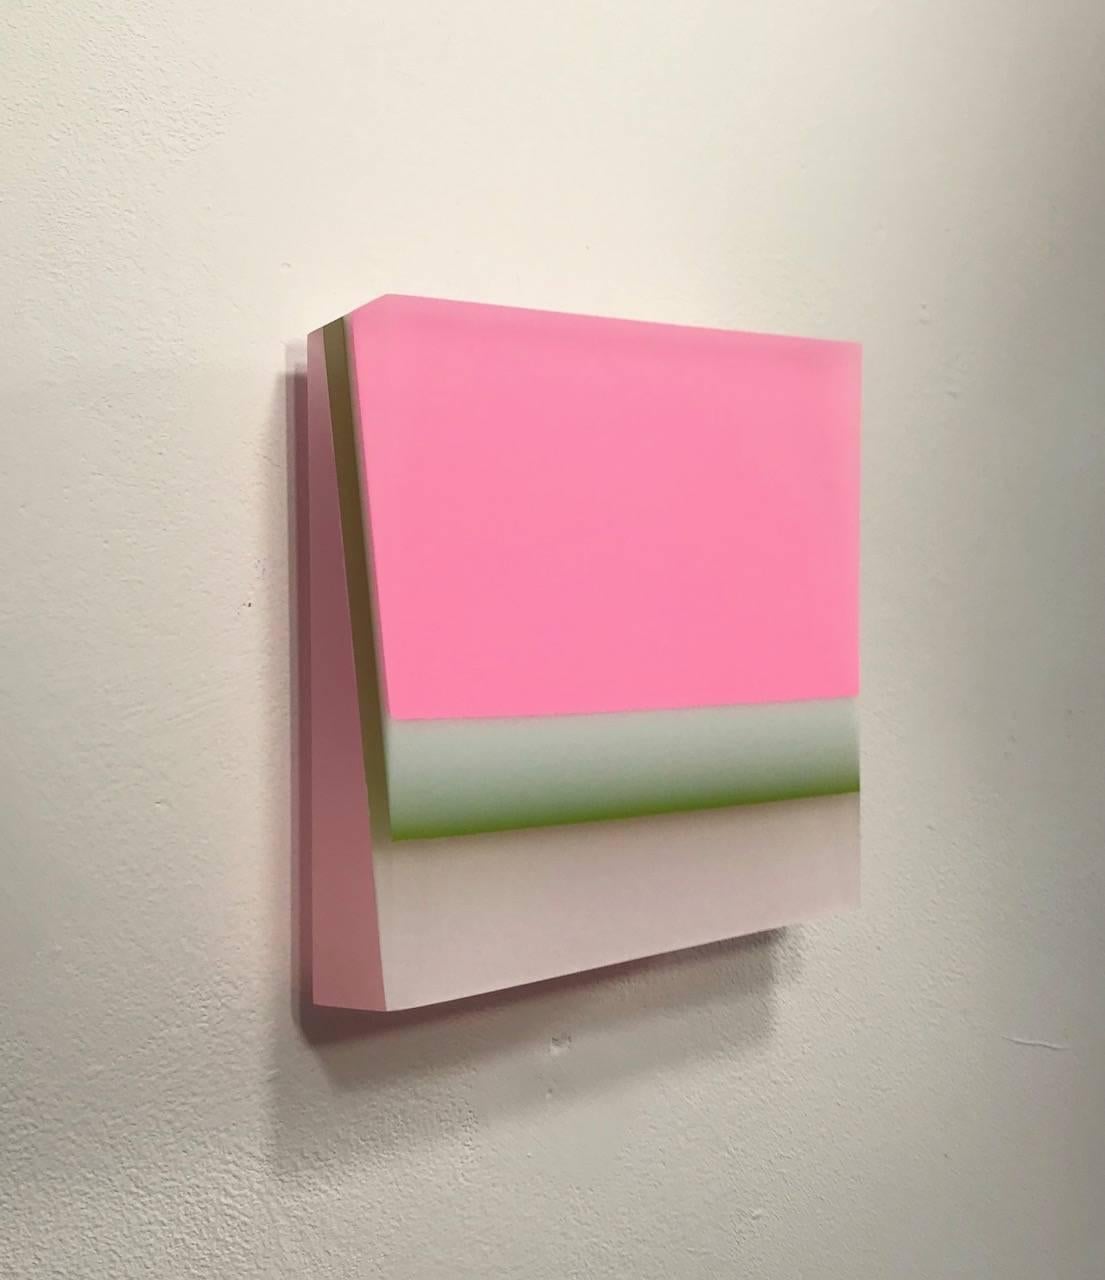 Untitled #12 green and pink- abstract modern translucent mural wall sculpture - Contemporary Mixed Media Art by Michelle Benoit